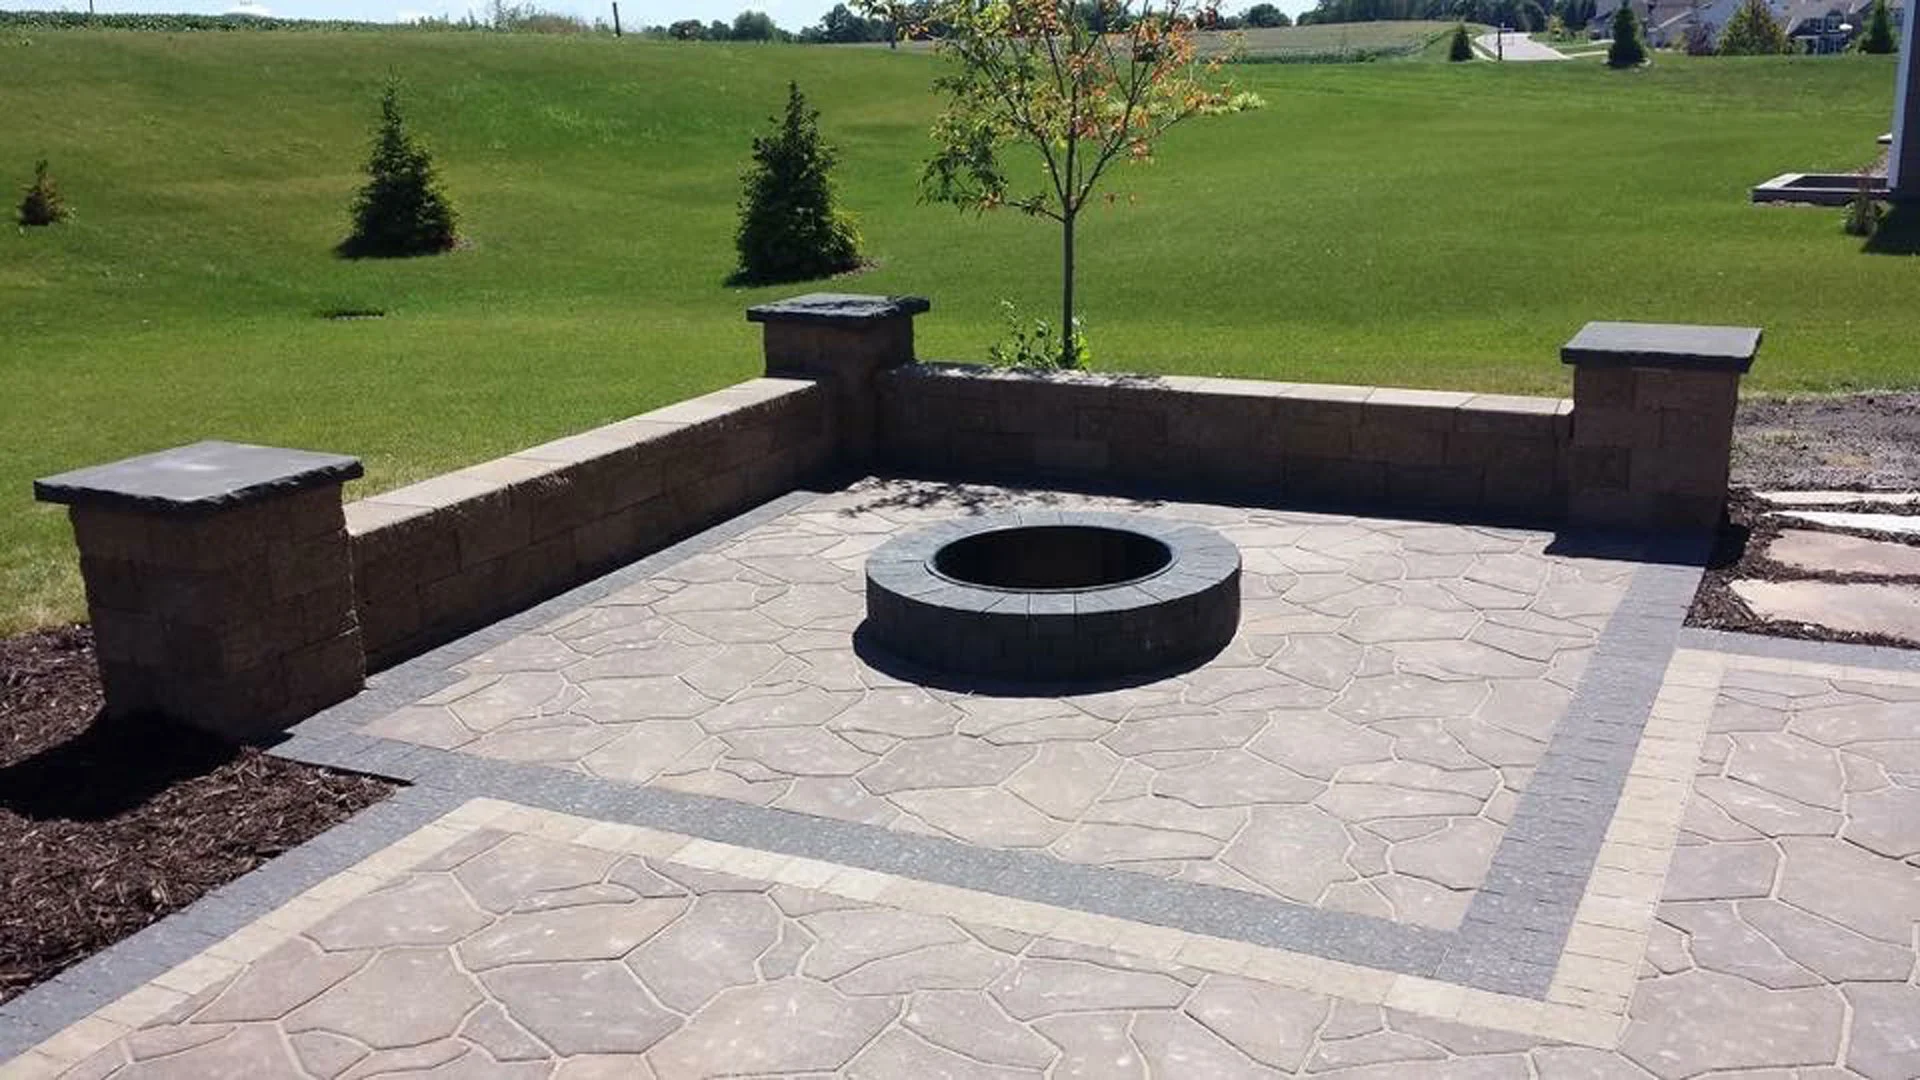 Seating wall installed beside fire pit in Urbandale, IA.